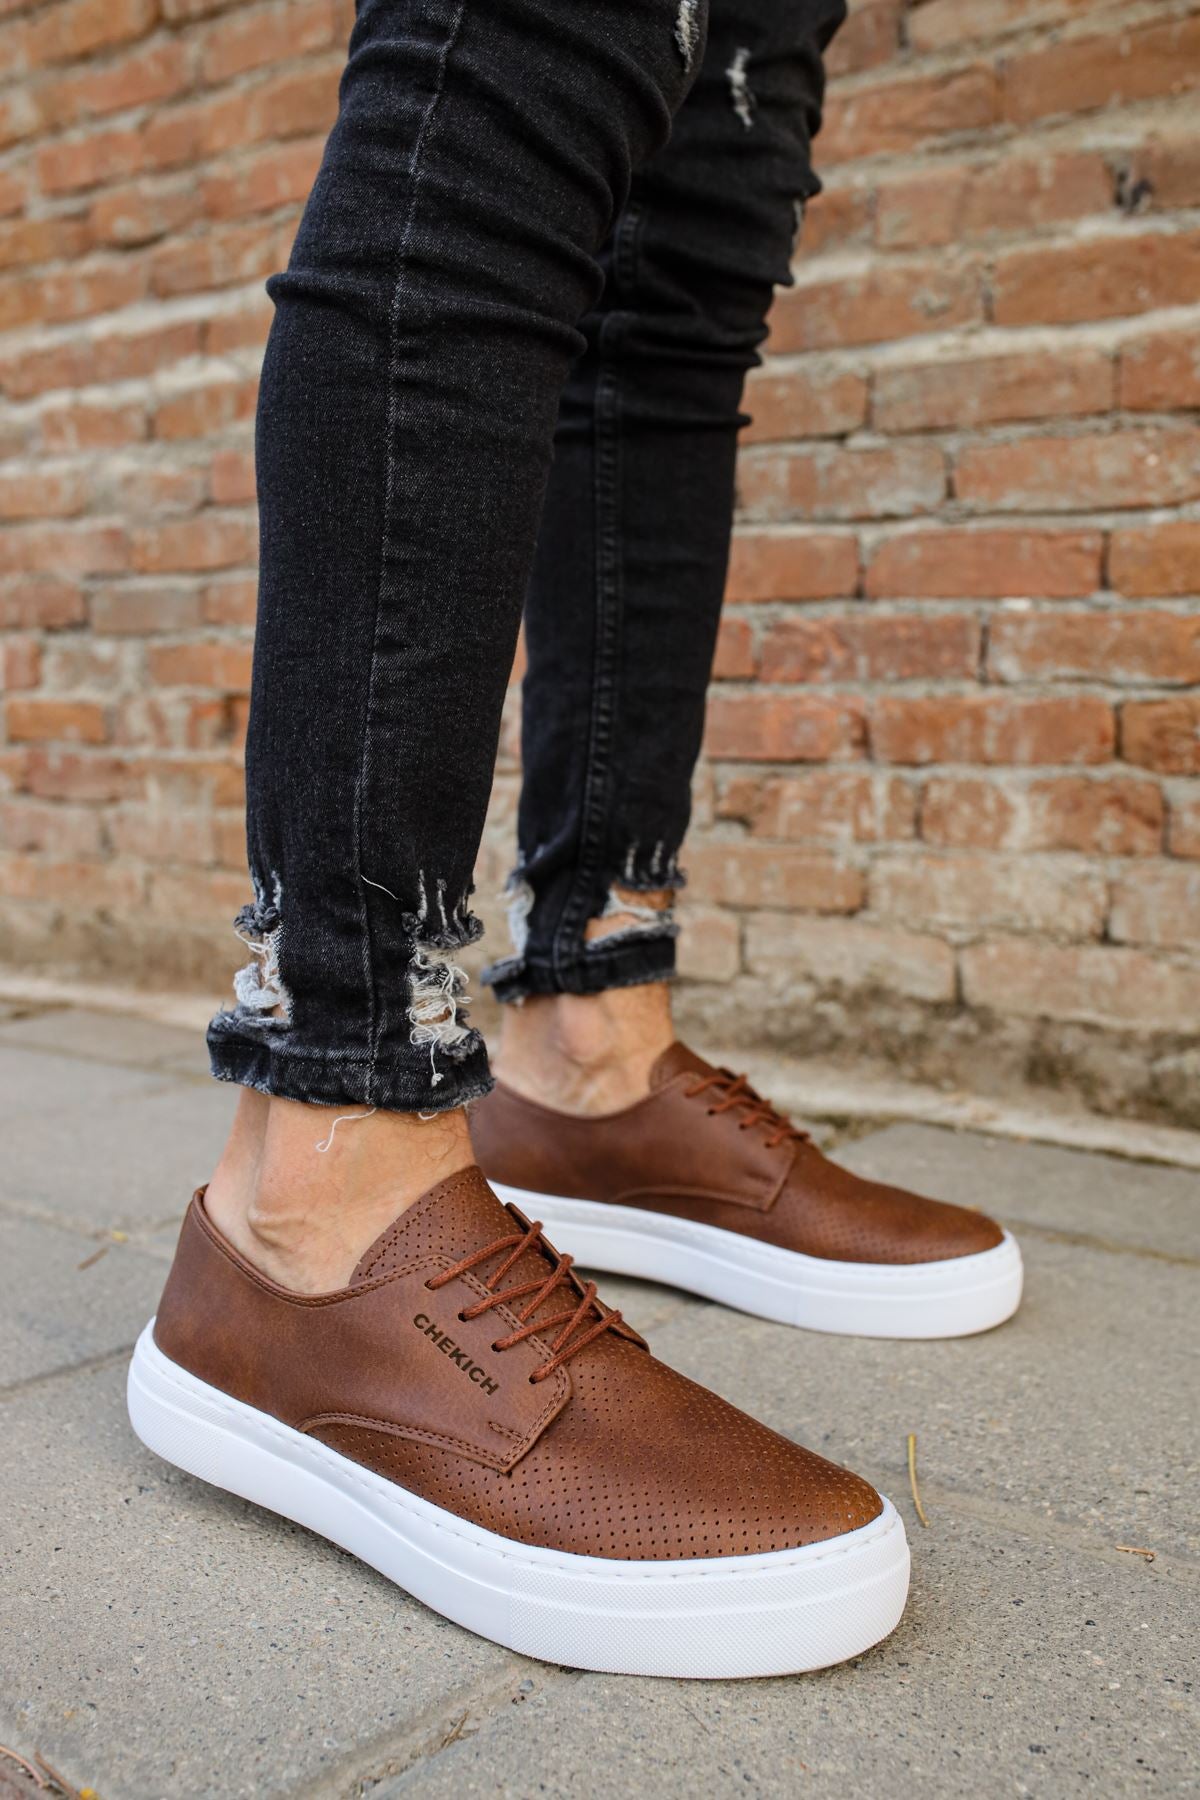 CH061 Men's Orthopedics Brown-White Sole Lace-up Casual Sneaker Shoes - STREETMODE ™